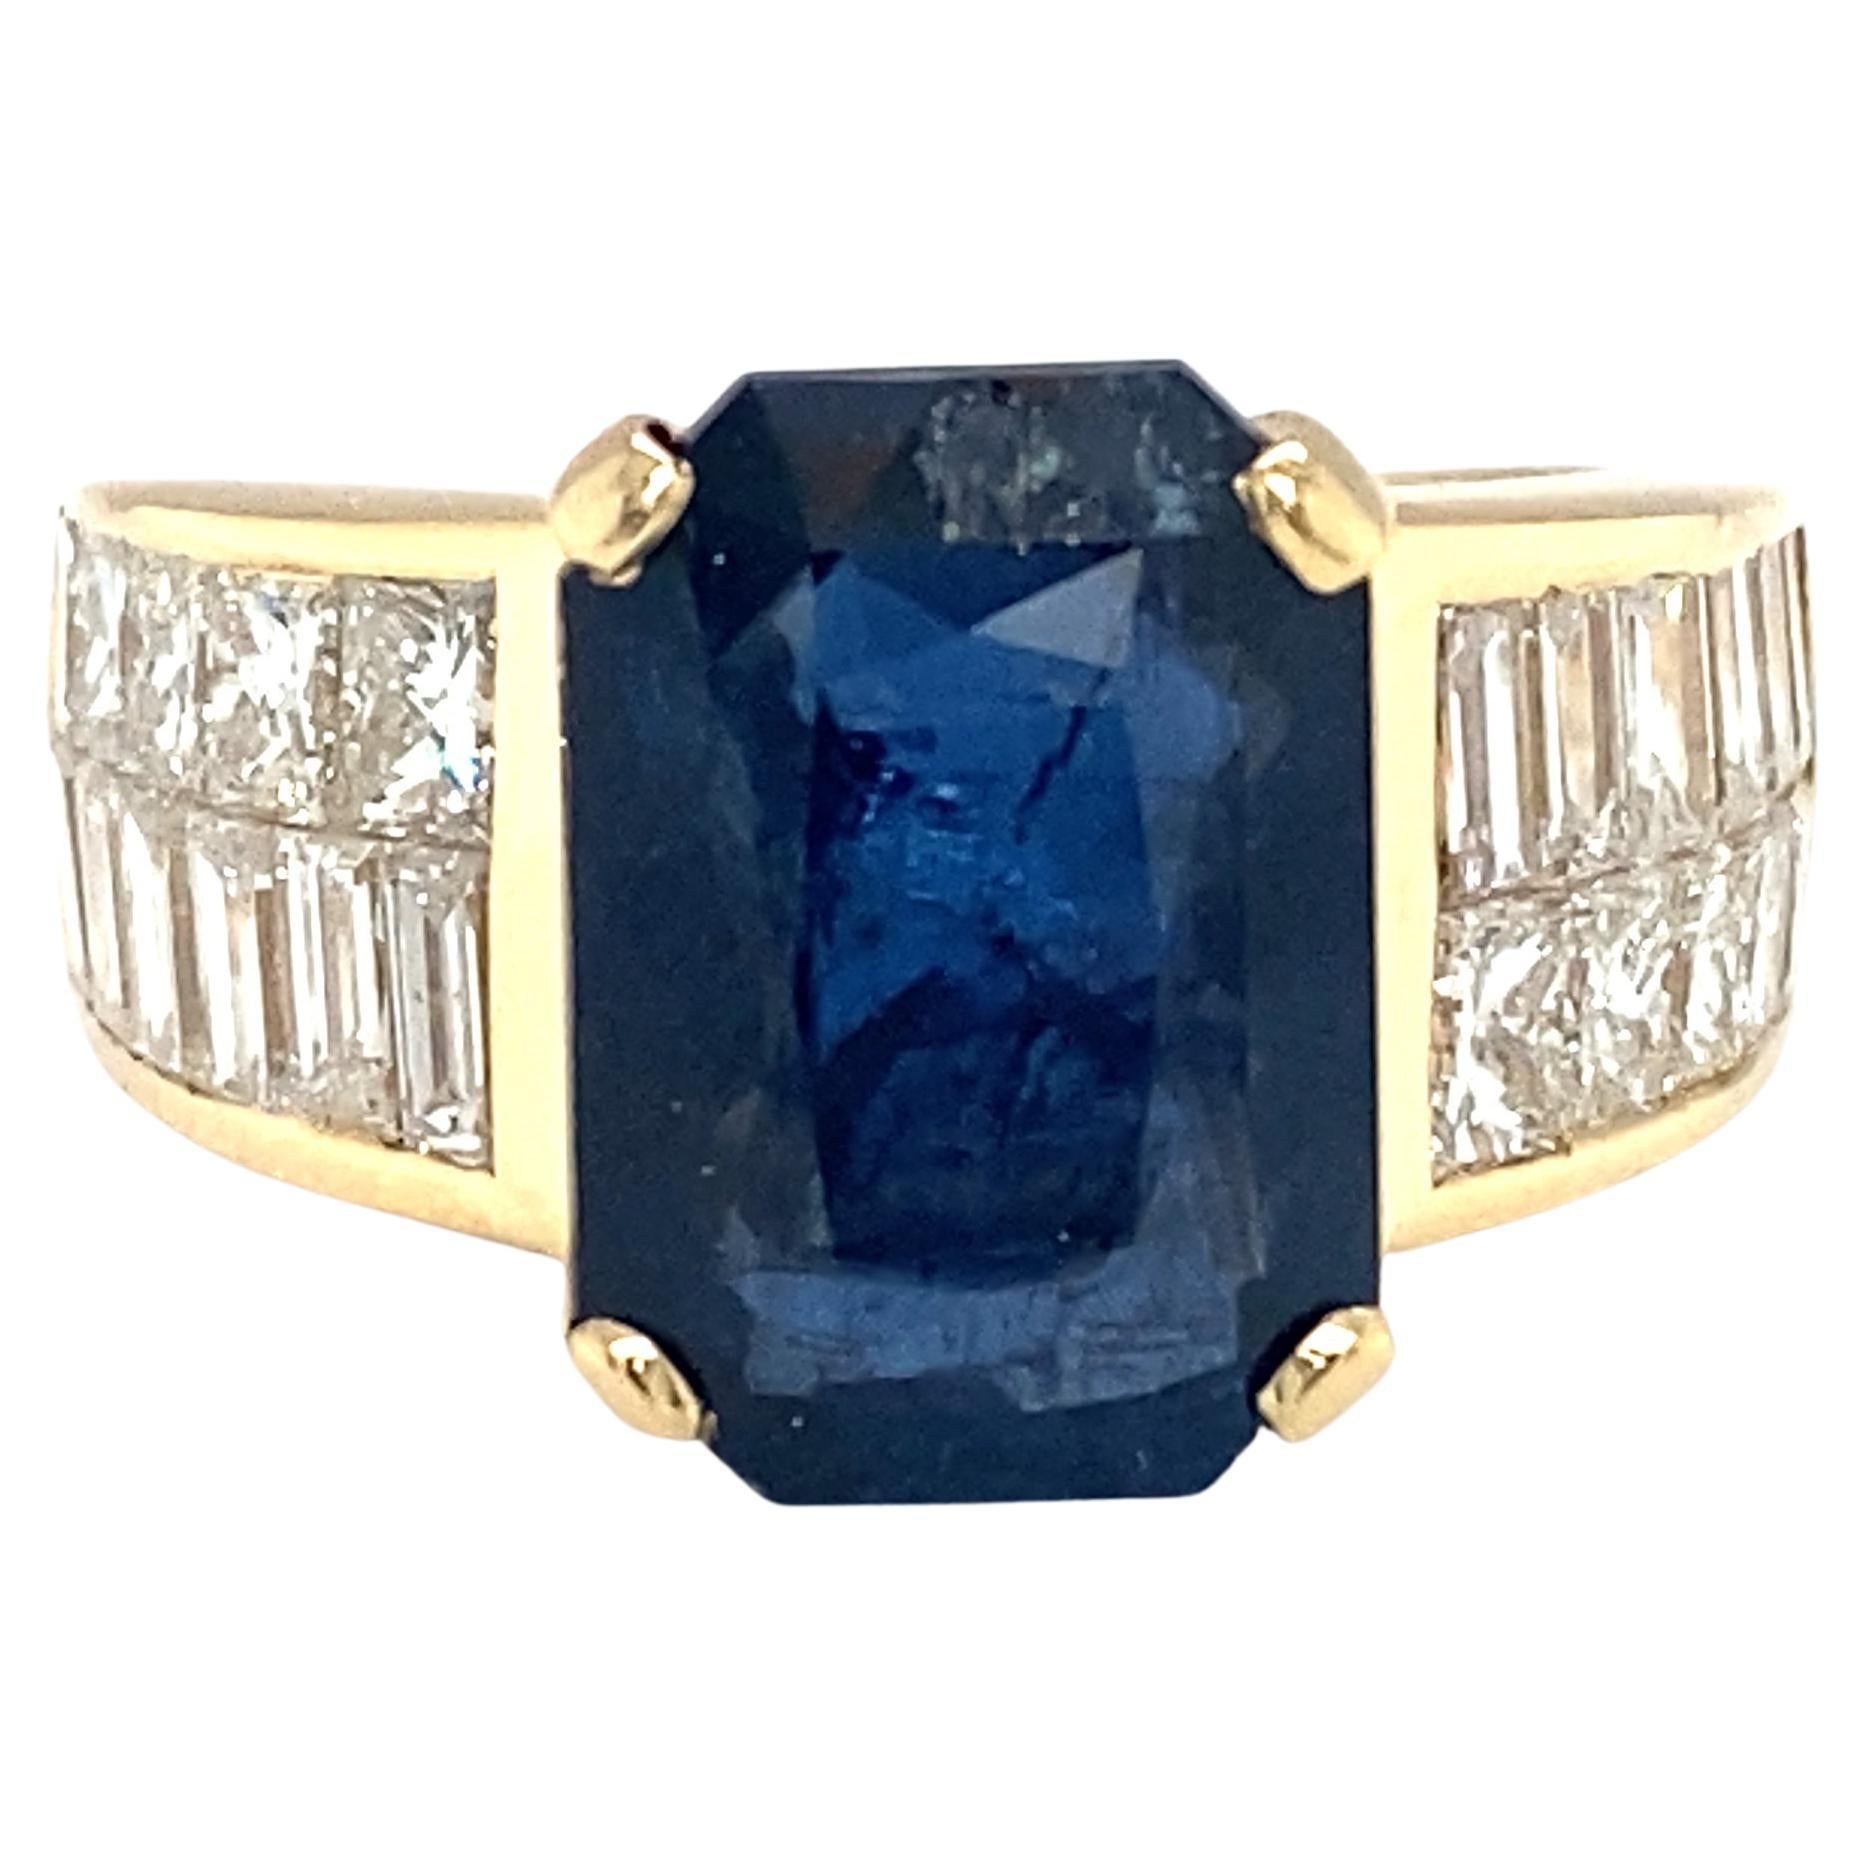 GIA Certified 6.35 Carat Emerald Cut Sapphire Diamond Cocktail Ring in 18K Gold For Sale